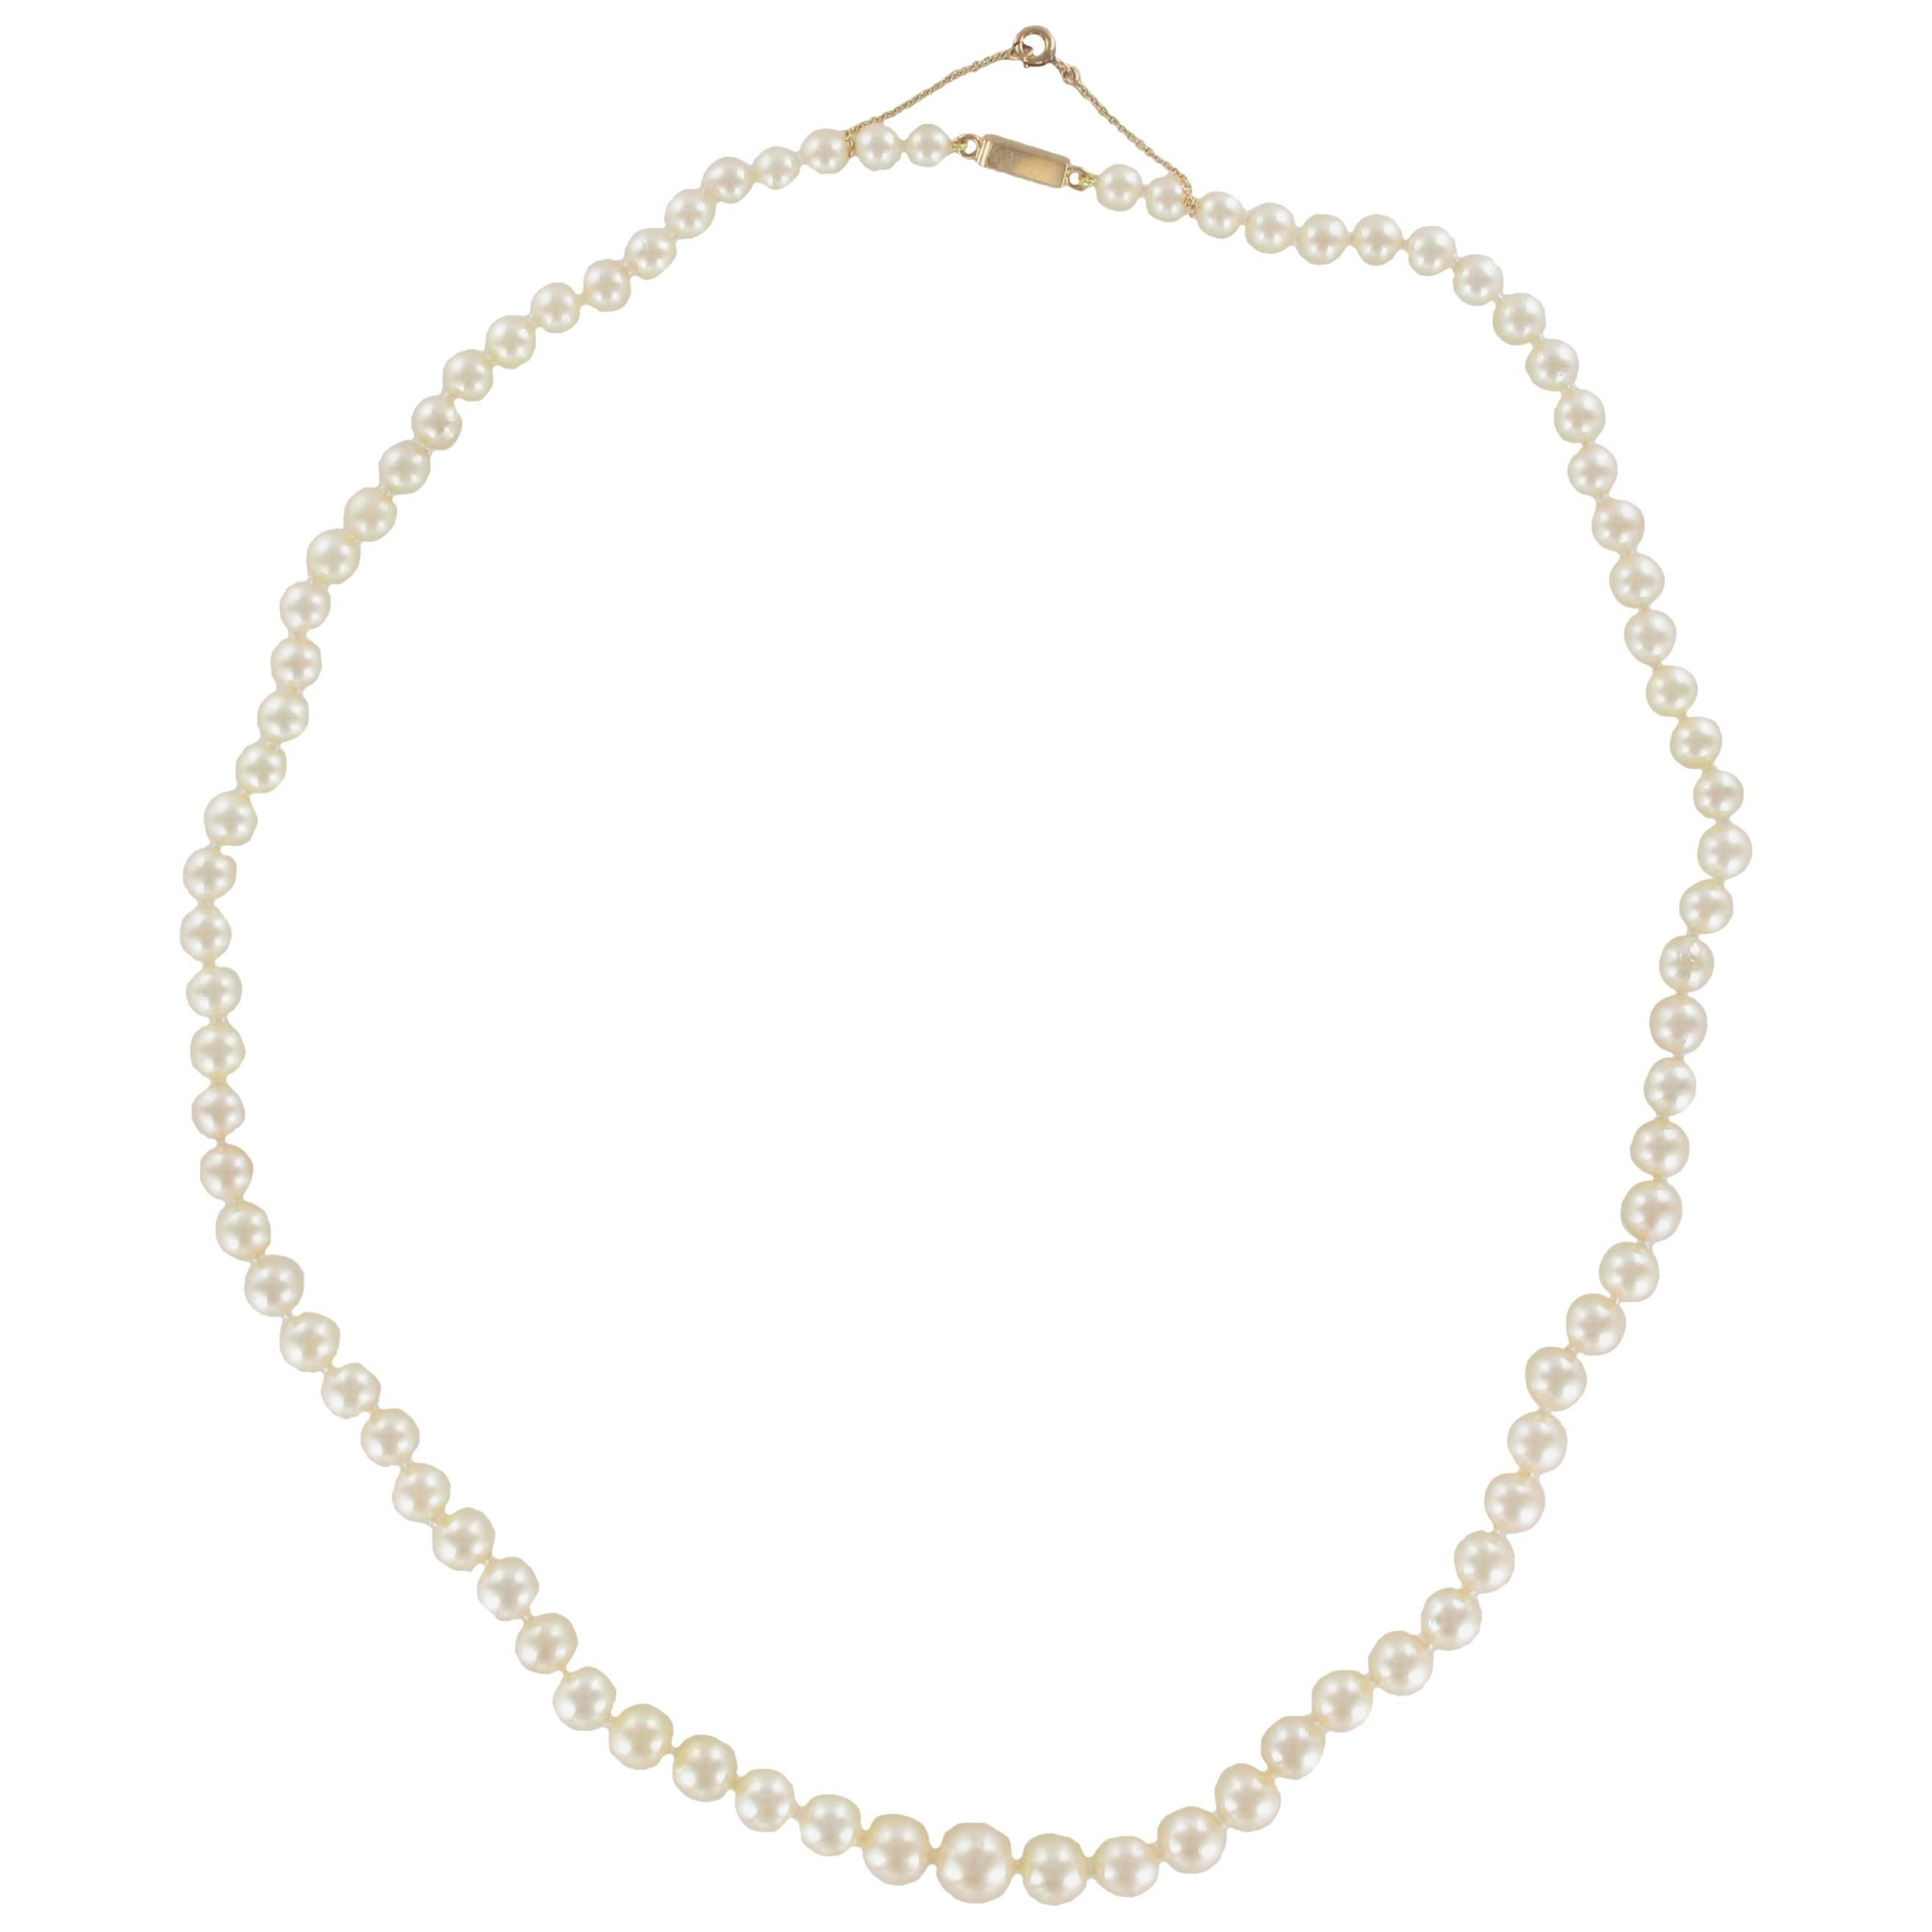 1950s Japanese Cultured Round White Pearl Necklace